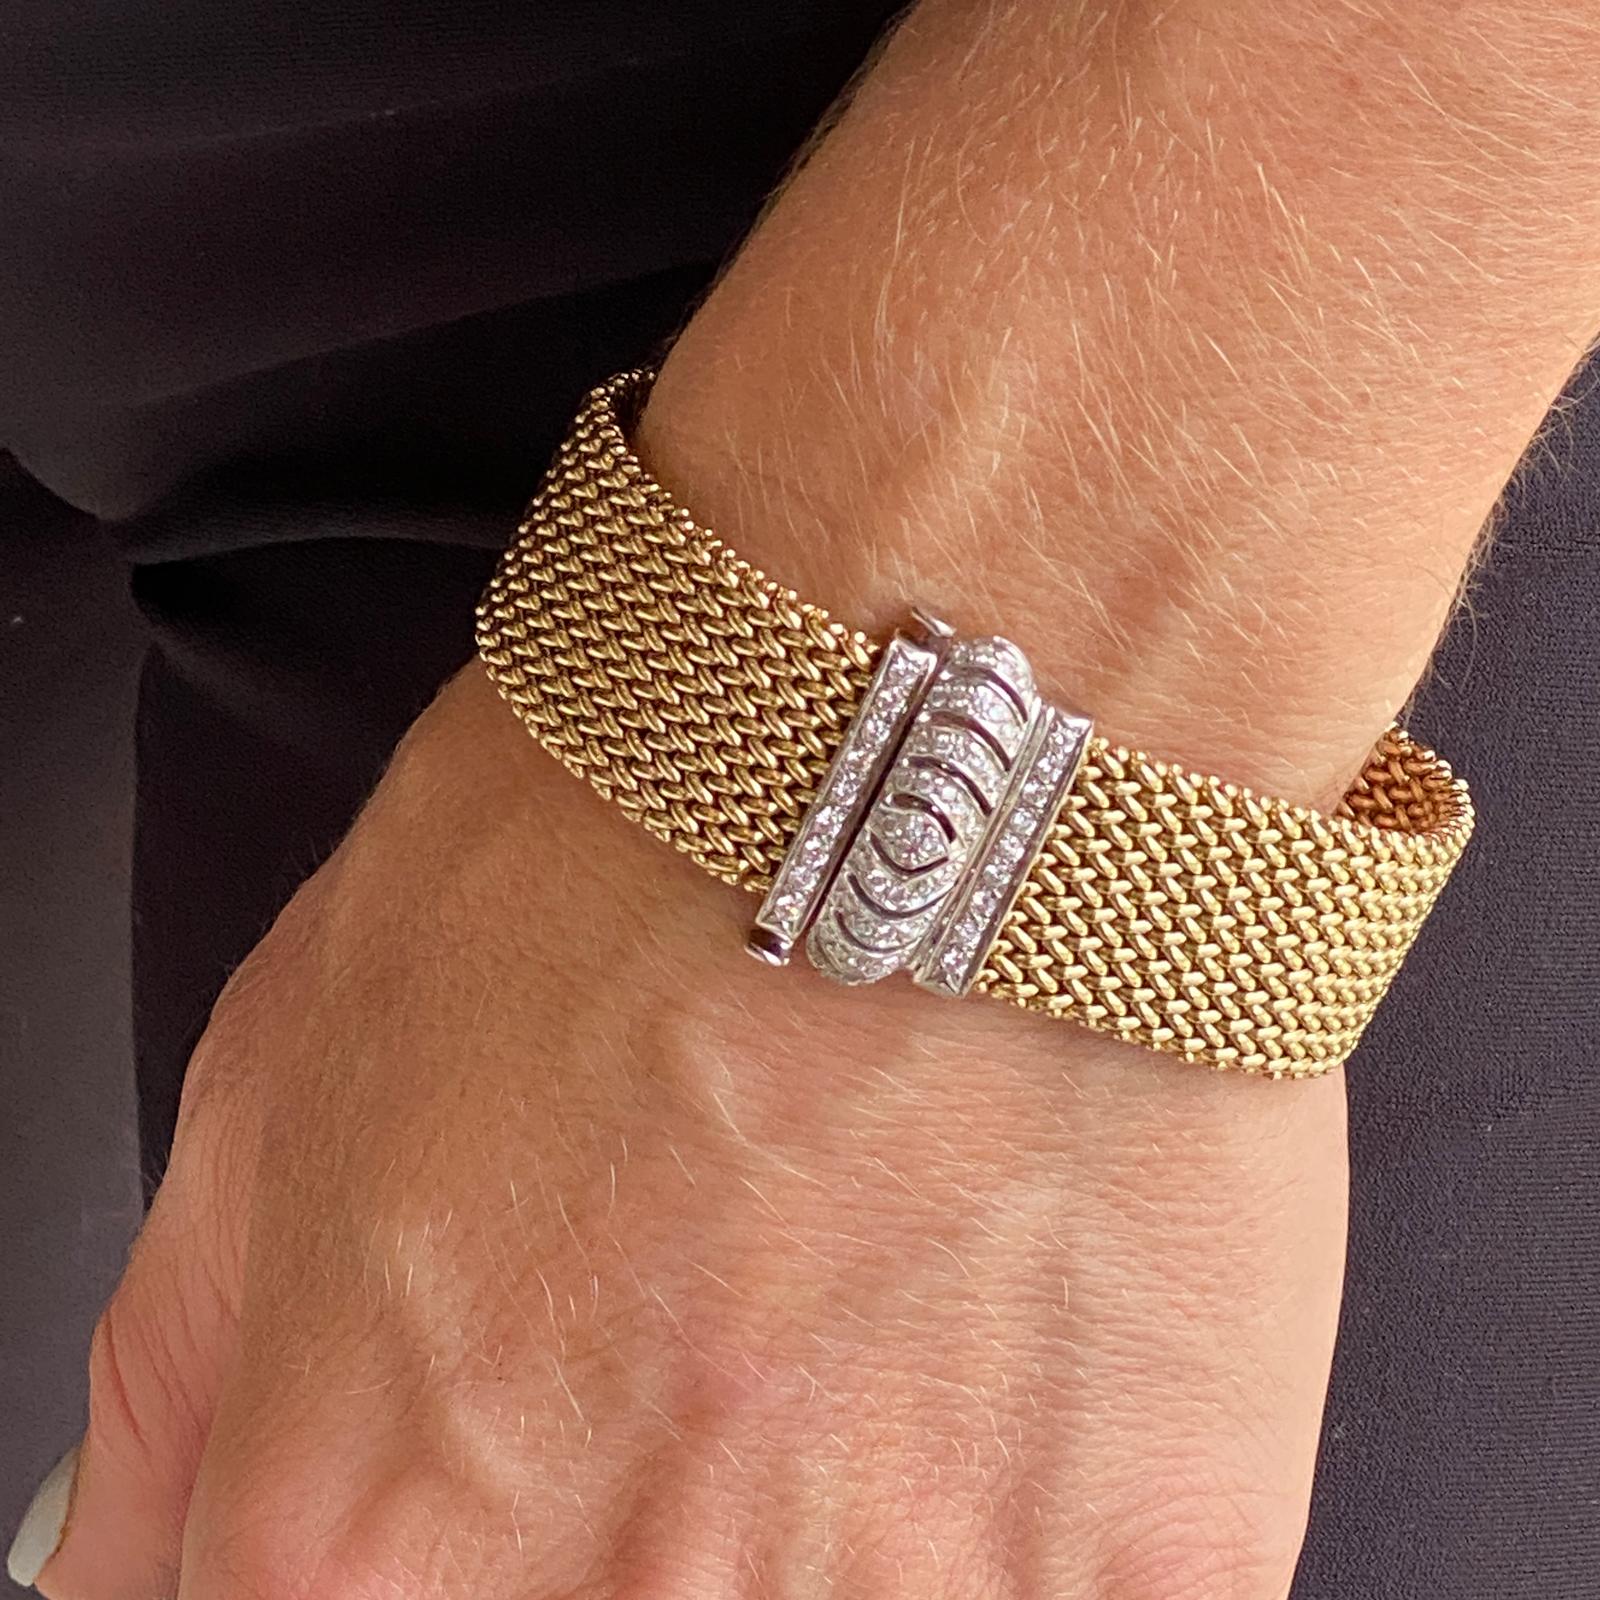 Beautiful diamond clasp woven gold bracelet fashioned in 14 karat yellow and white gold. The clasp features 57 round brilliant cut diamonds weighing .75 carat total weight and graded H-I color and SI clarity. The woven link bracelet measures 7